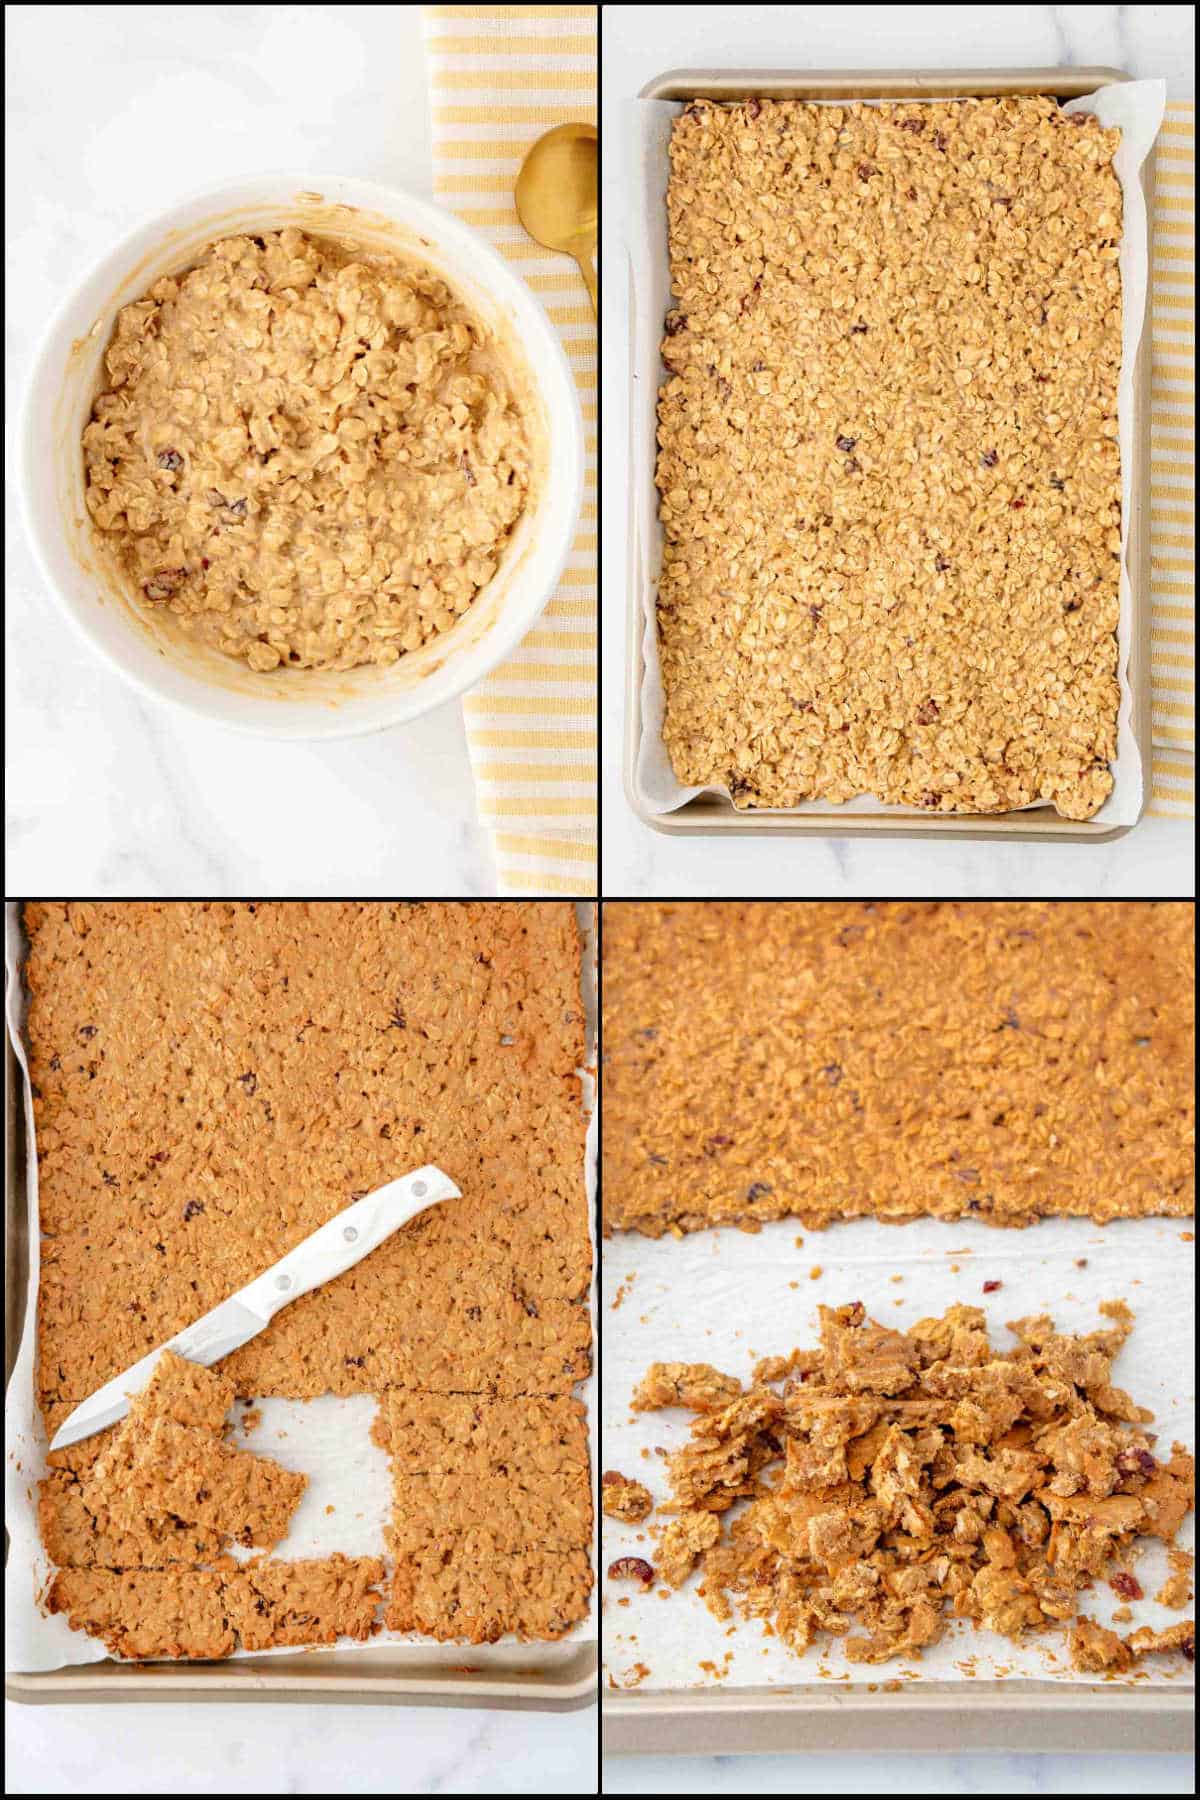 Collage of baking granola for dogs.